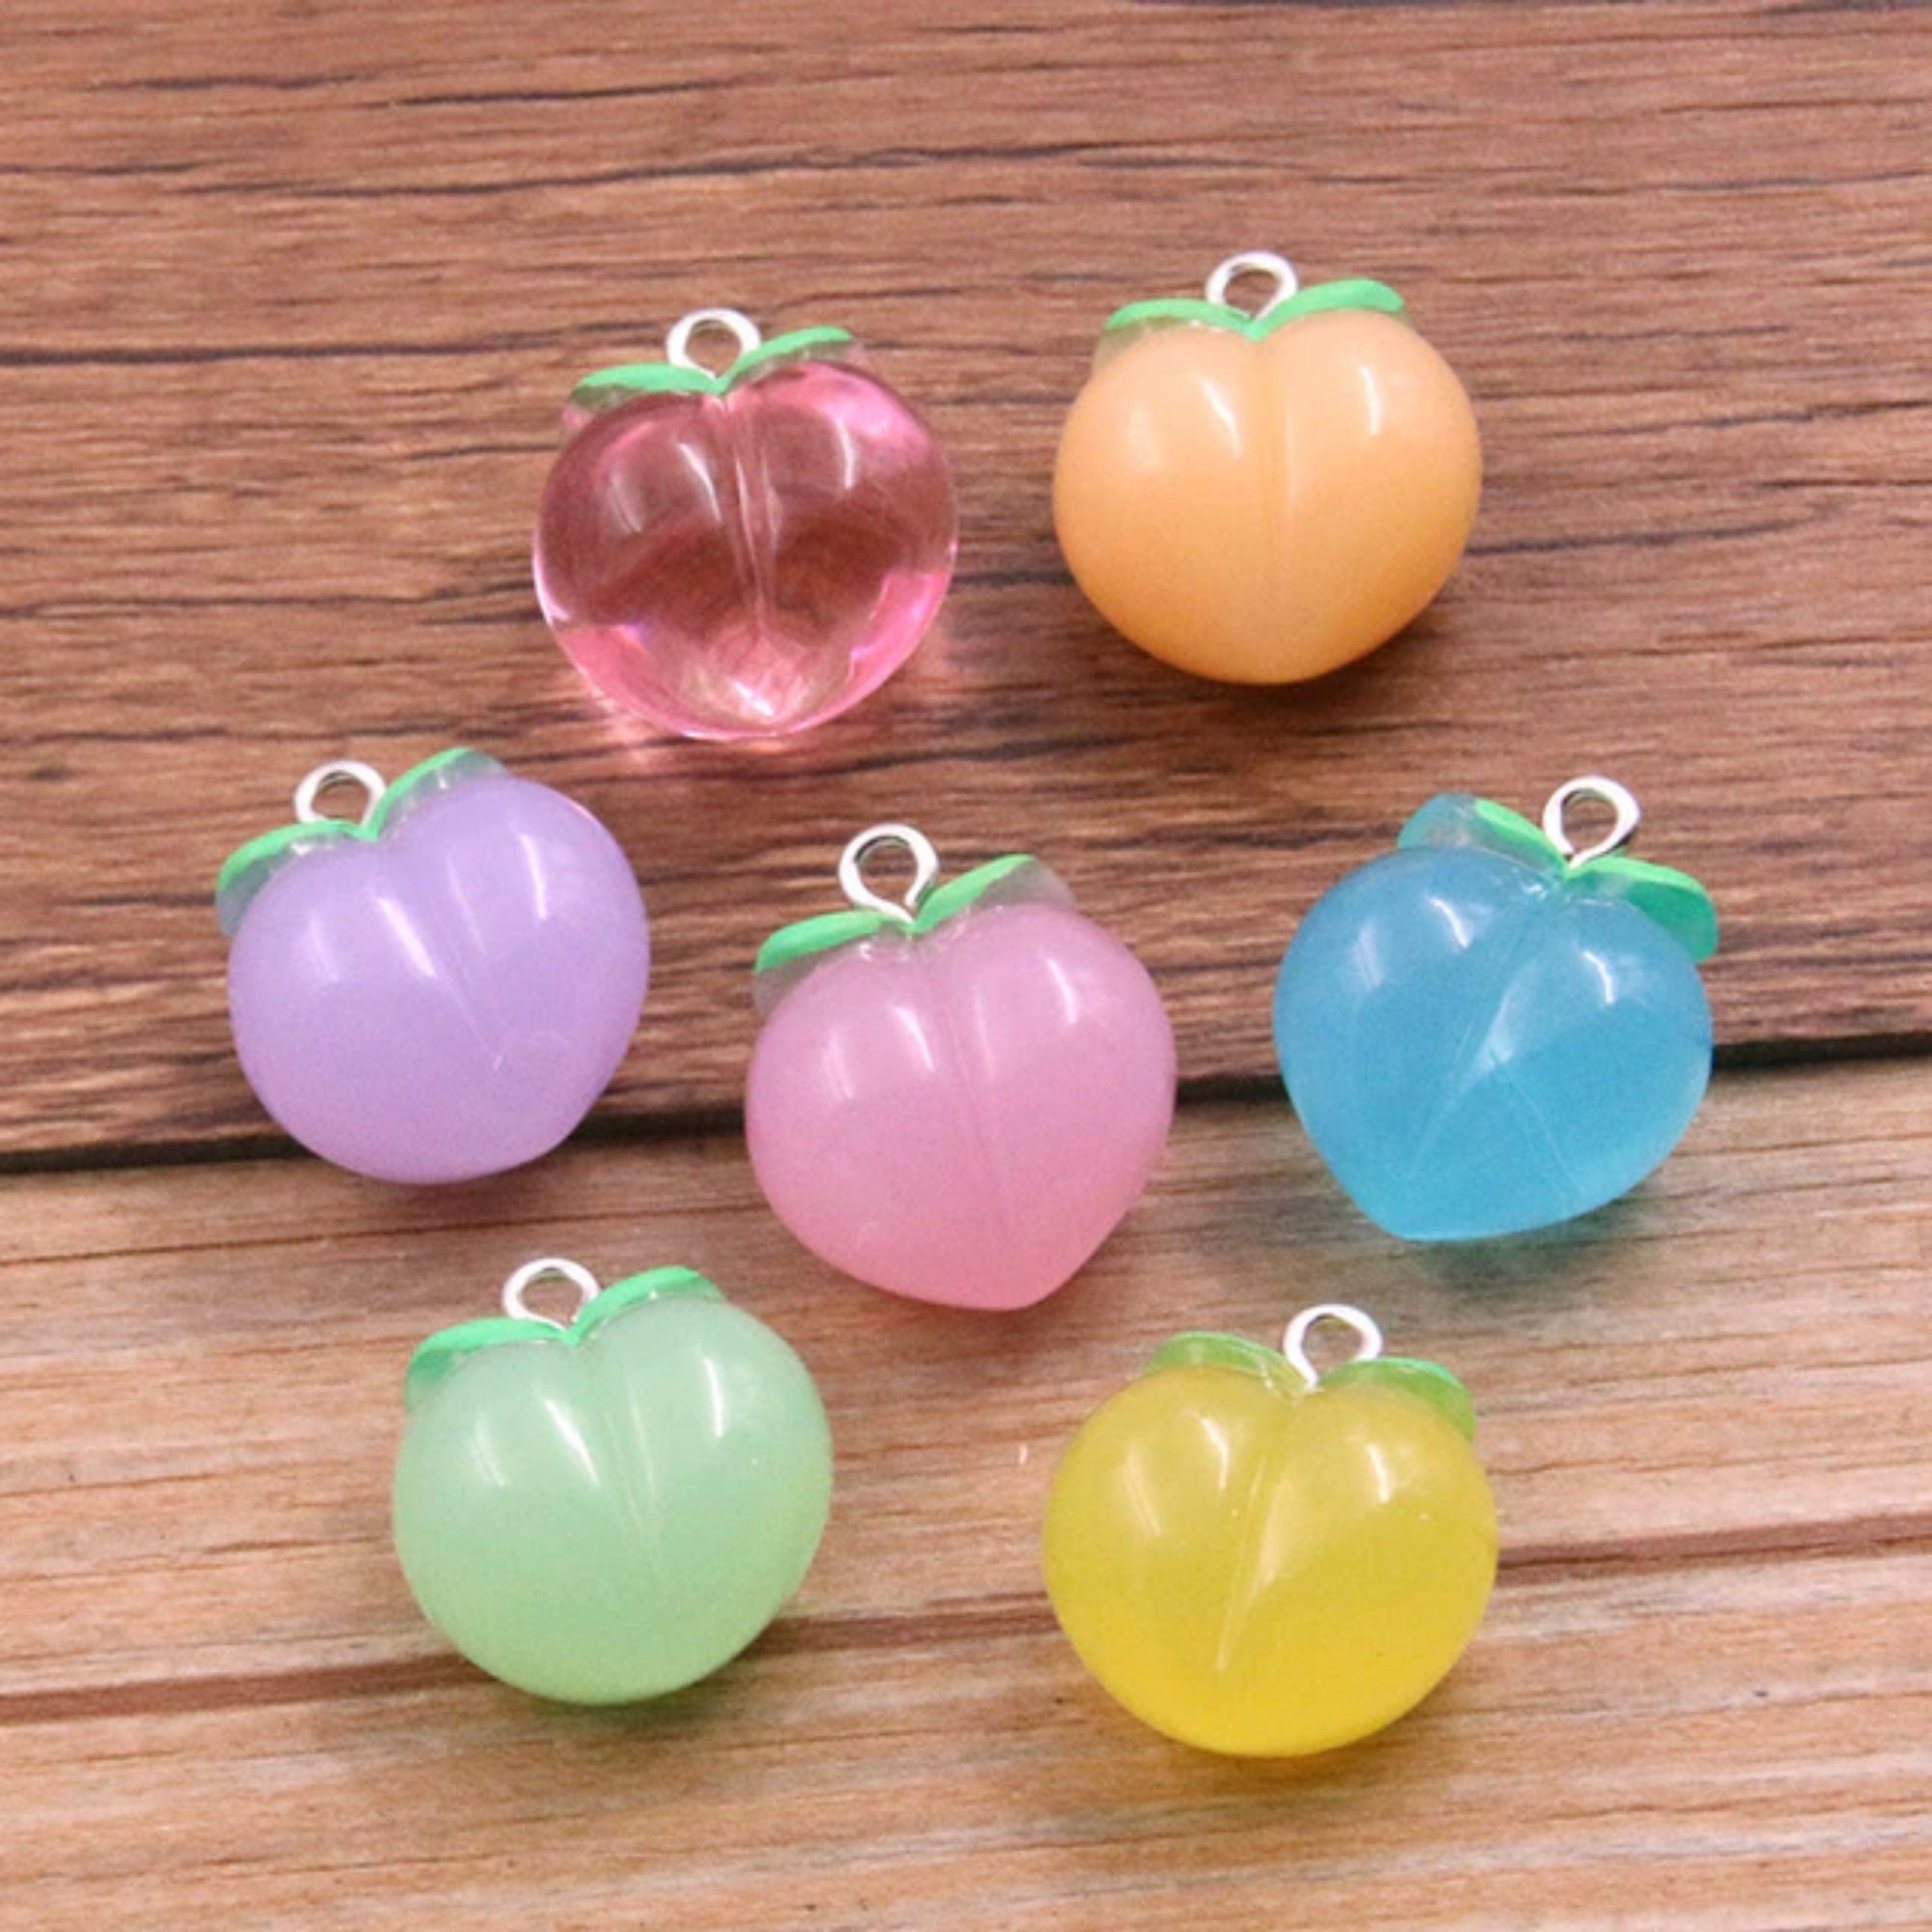 10pcs Cute 3D Brightly Fruit Cherry Resin Charms For Earring Keychain  Pendant Accessory DIY Flatback Crafts